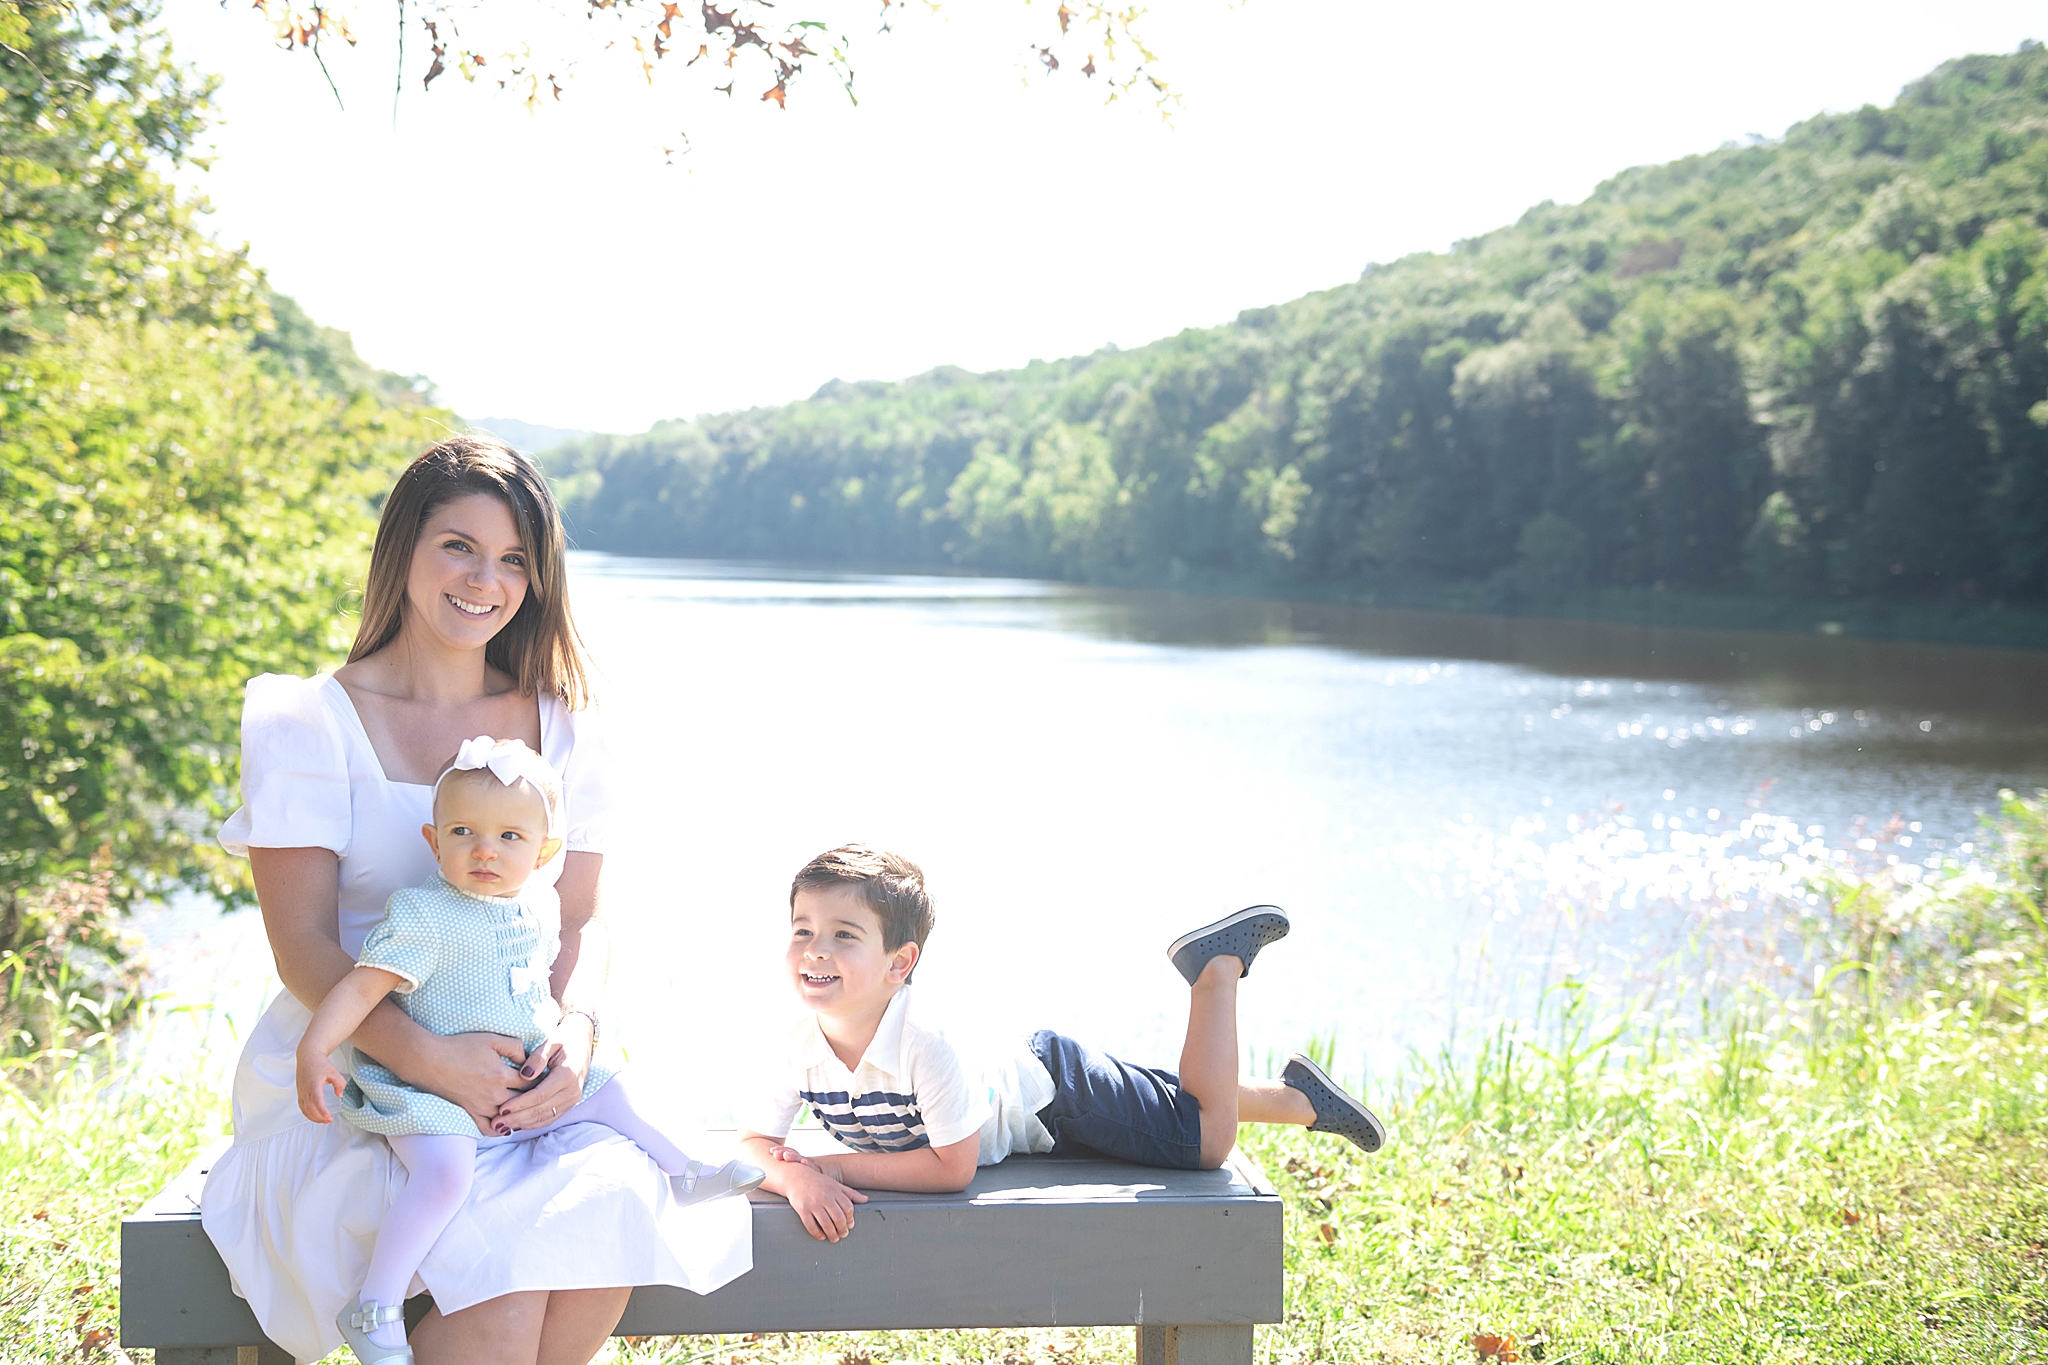 mom poses with toddler on bench by lake